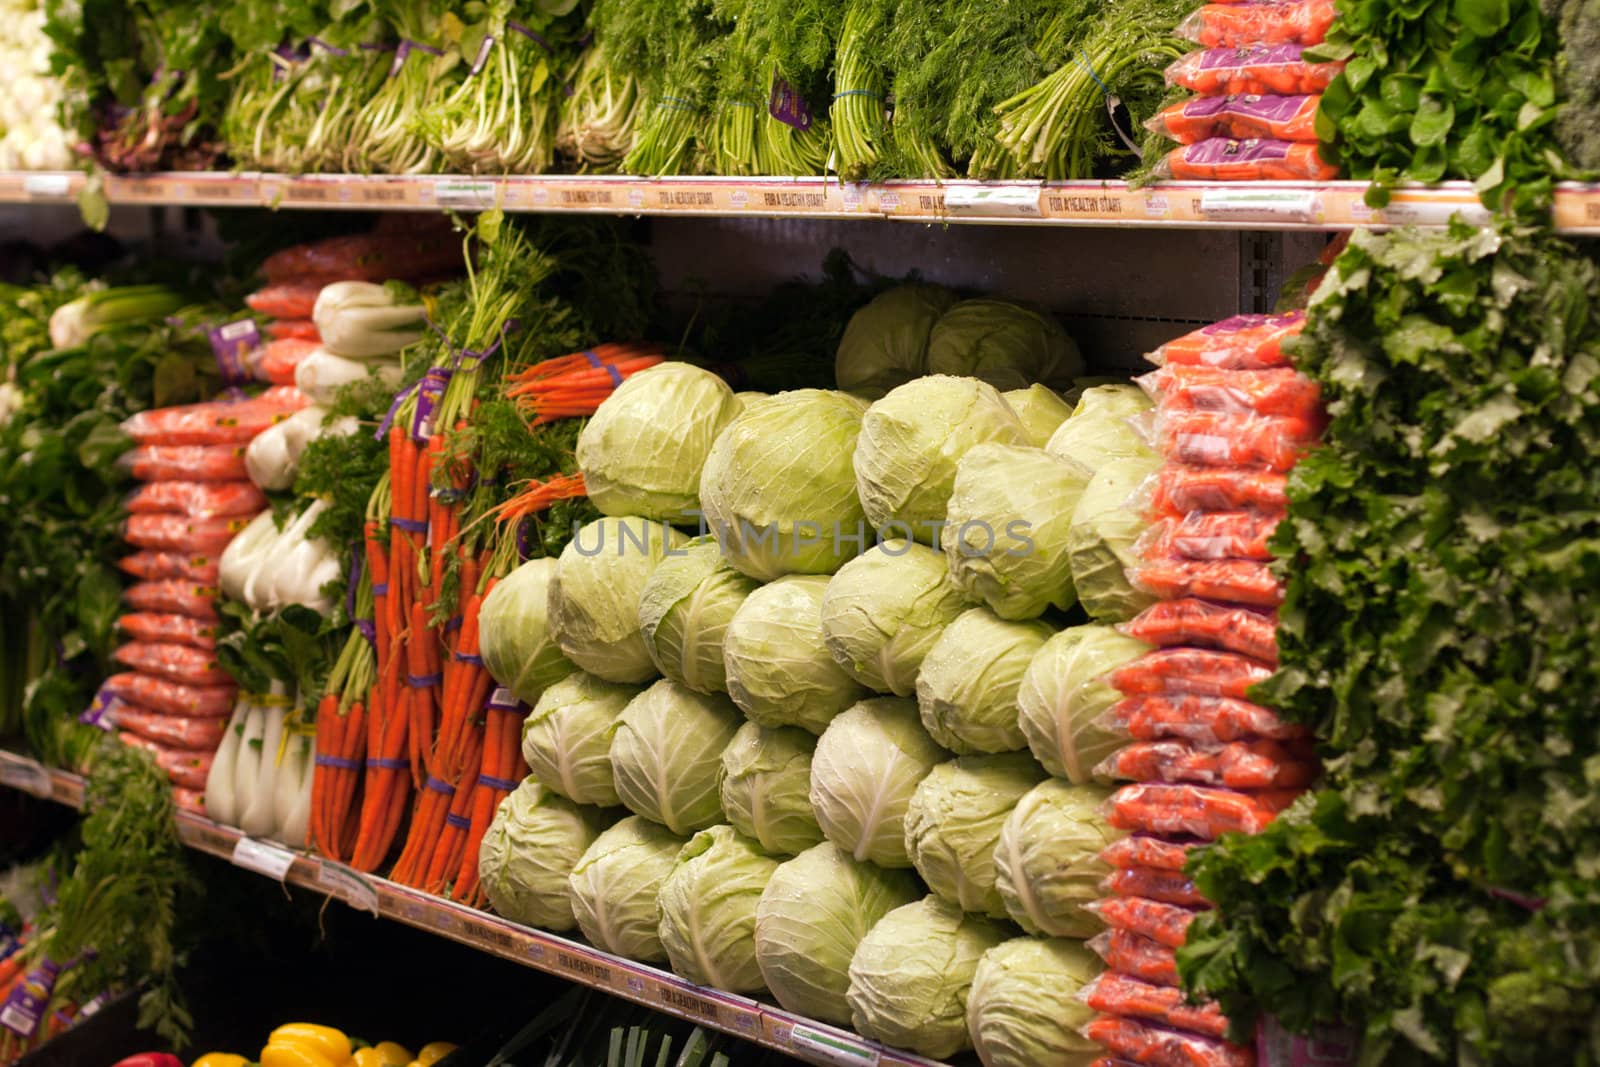 Cabbage and carrots on grocery stor shelf